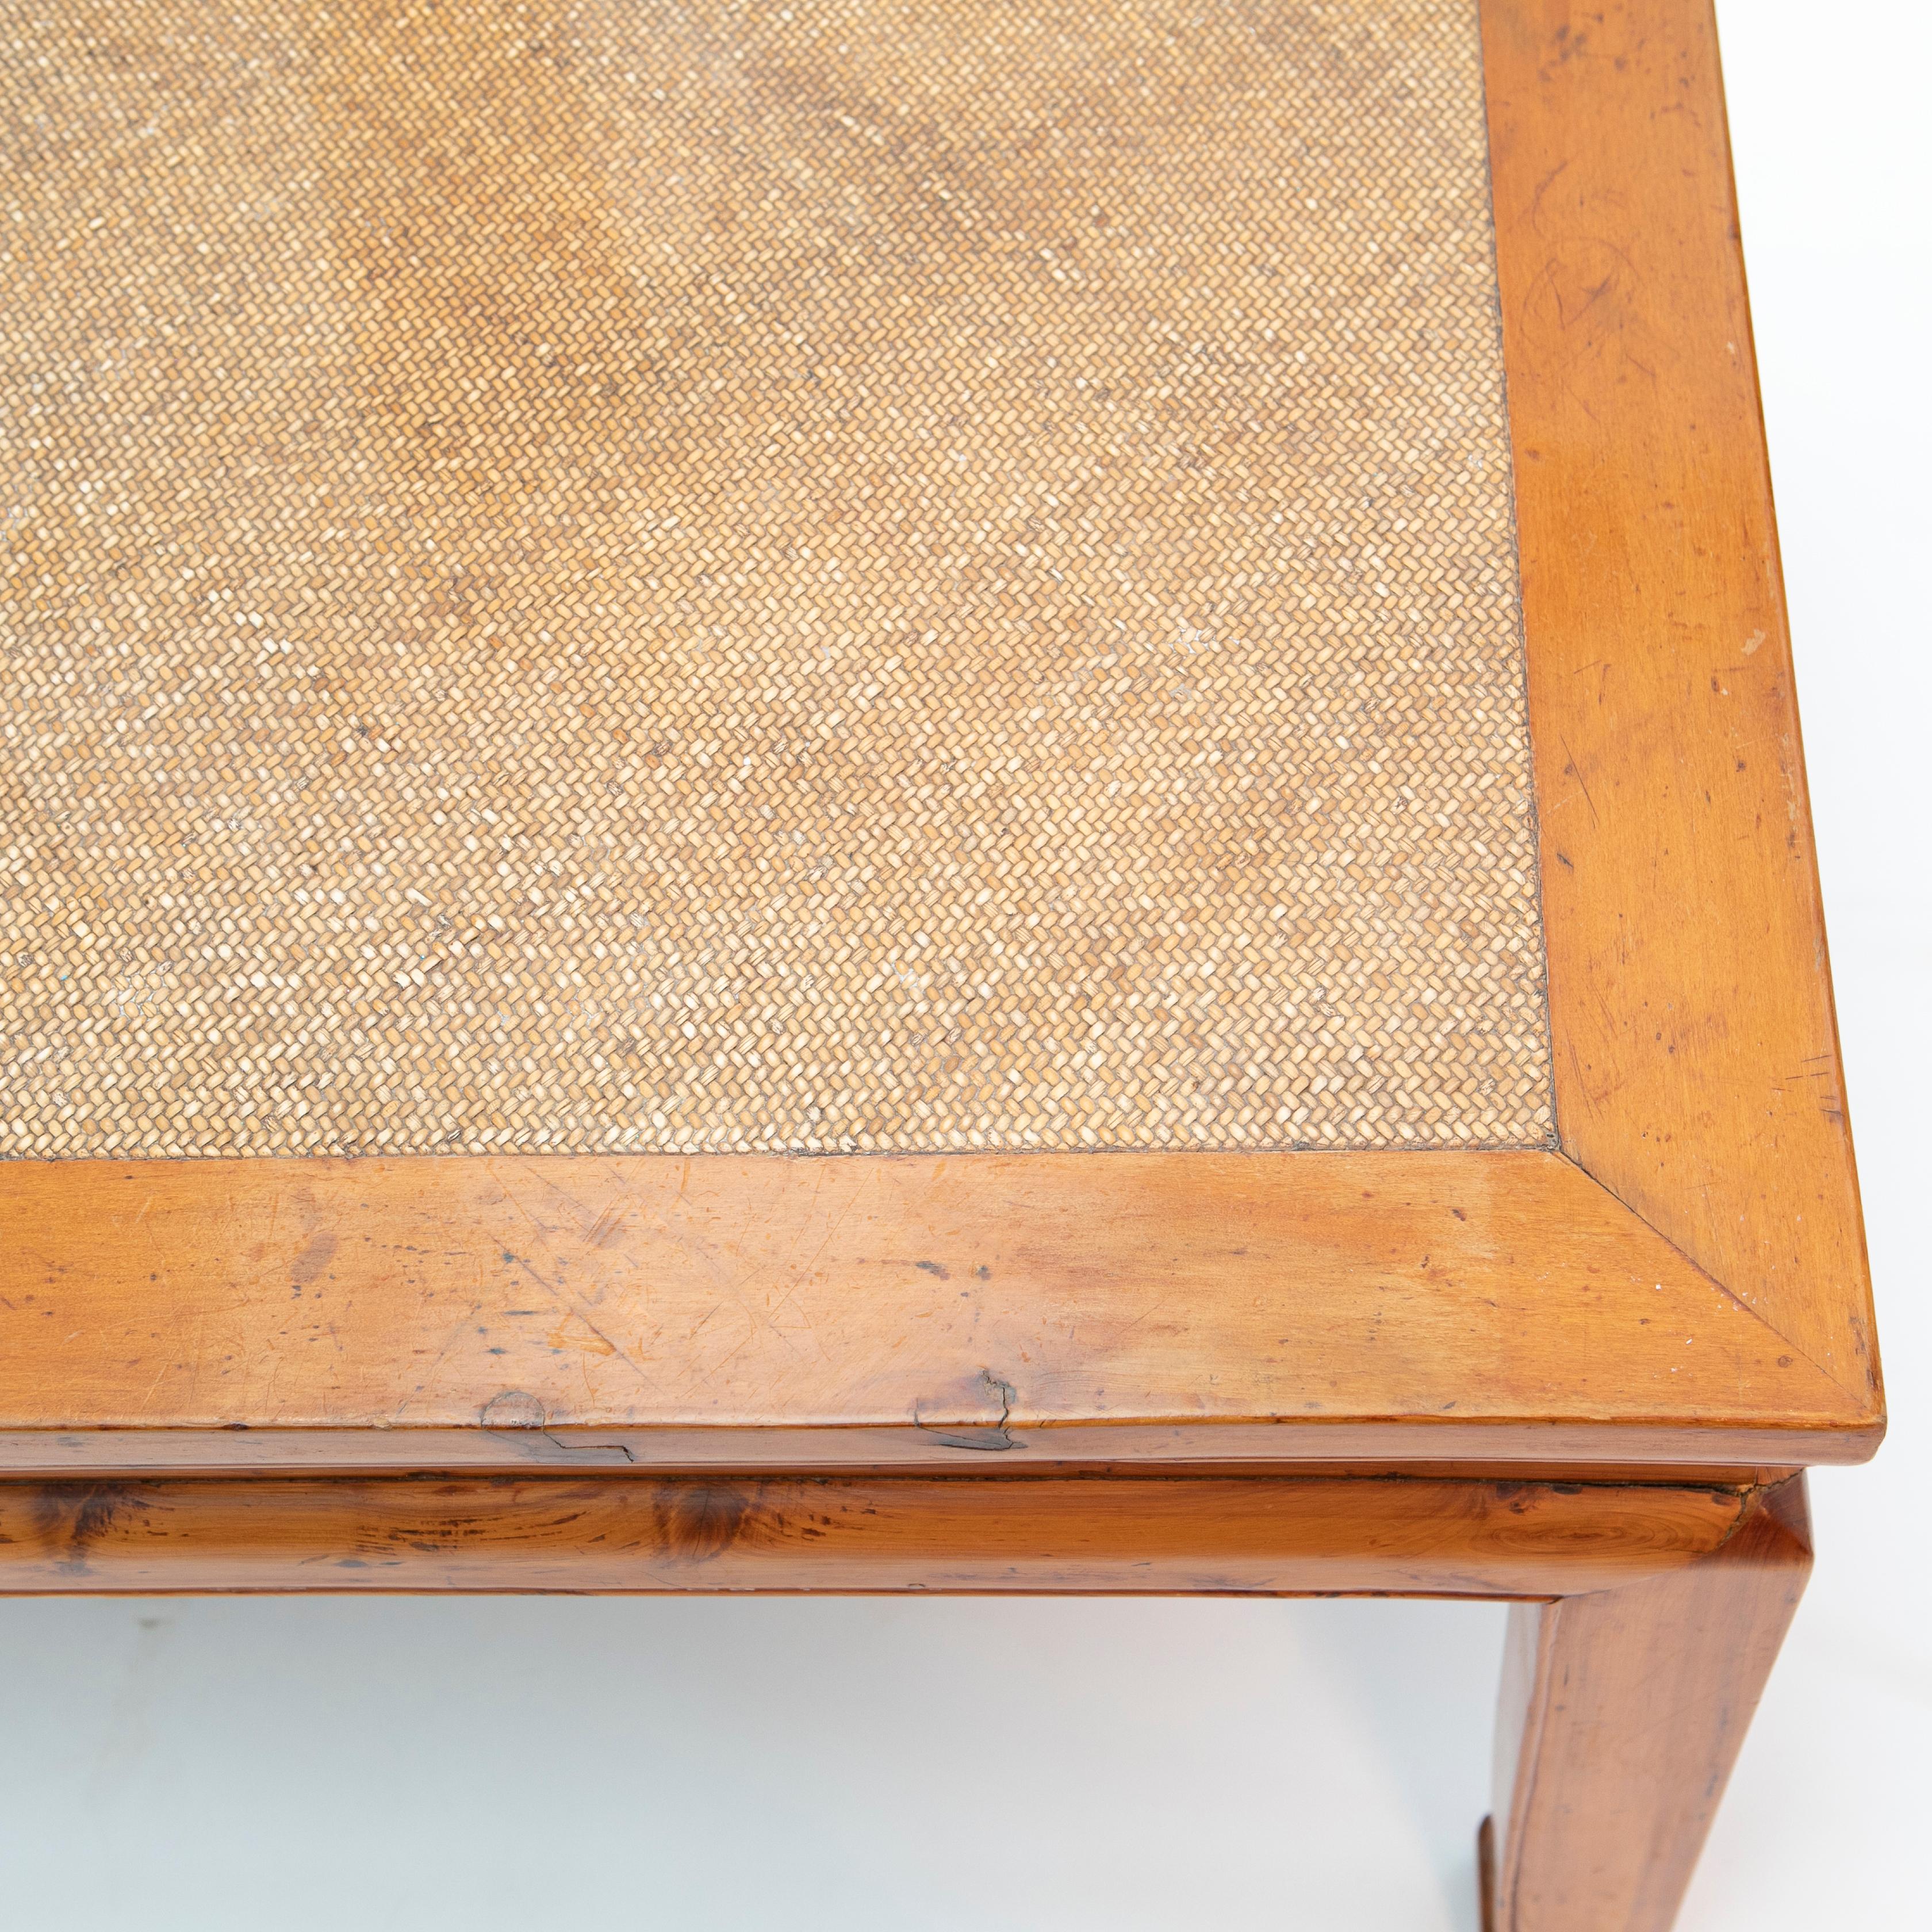 Ming Peach wood & Hard Cane Coffee Table For Sale